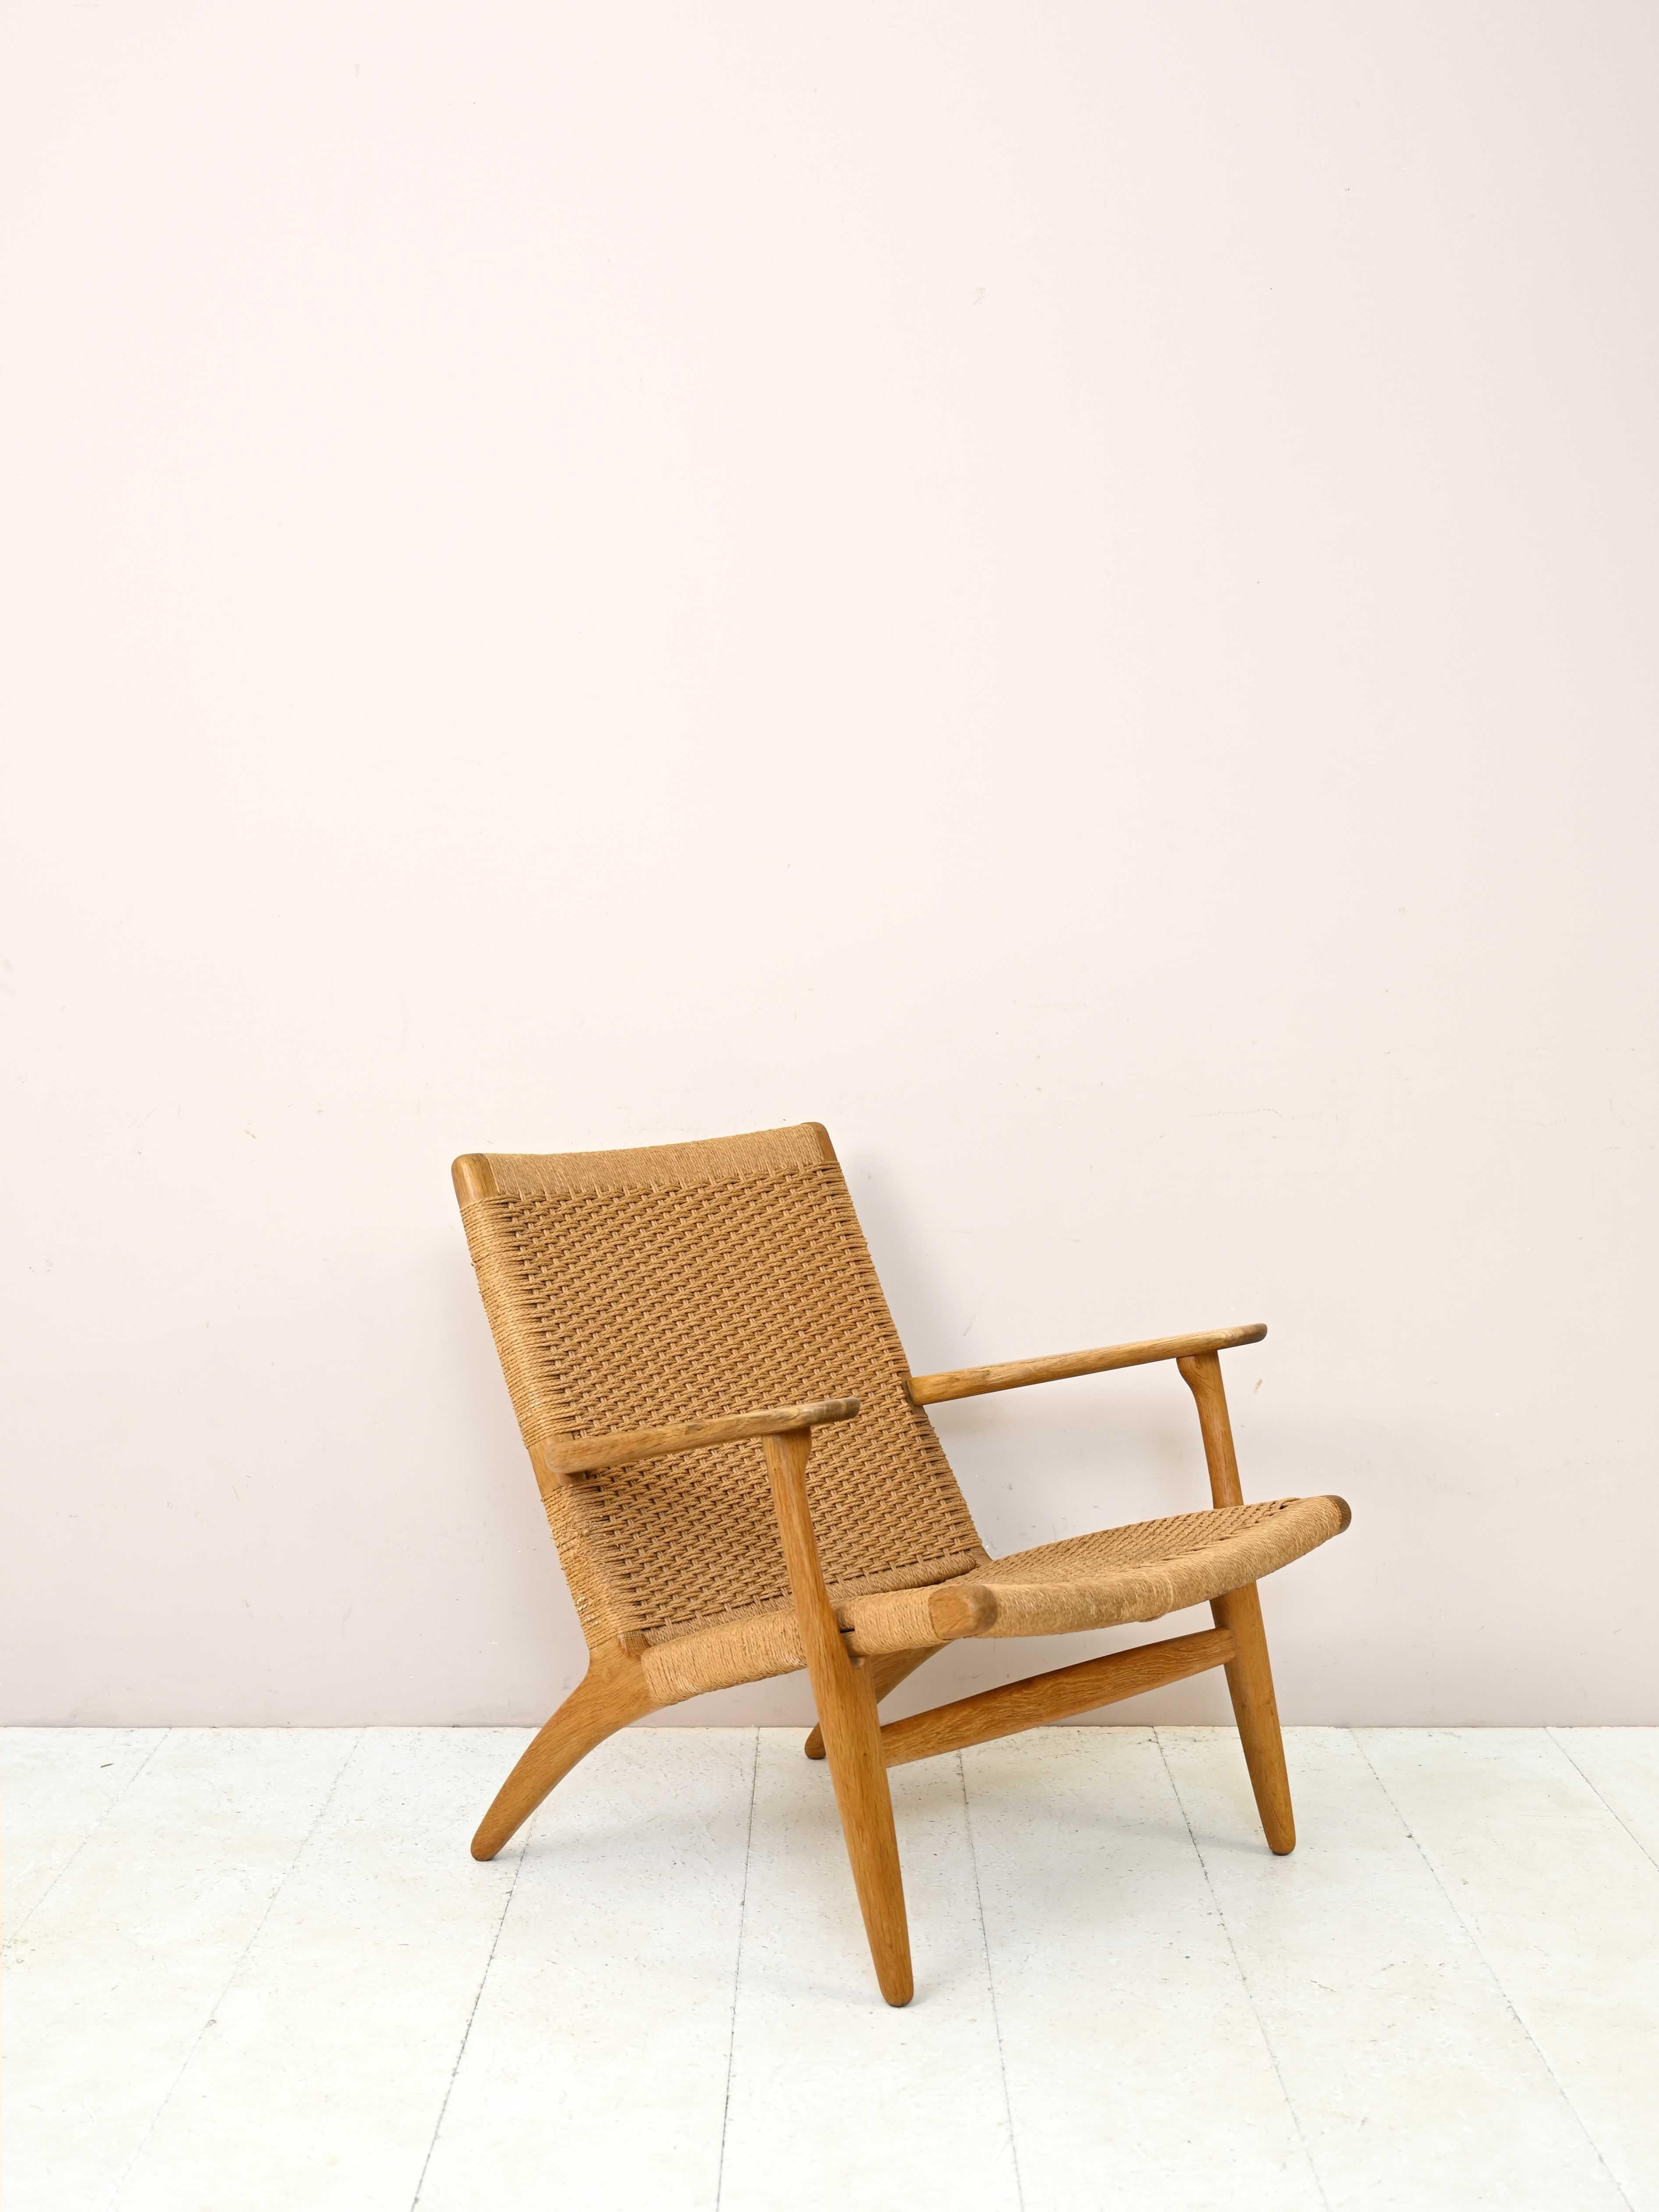 CH25 armchair by Hans J Wegner for Carl Hansen & Son, Denmark.

The armchair was designed in the 1950s by Wegner and has since become an indisputable icon of Scandinavian design.
Its originality lies in its use of paper cord, which requires a